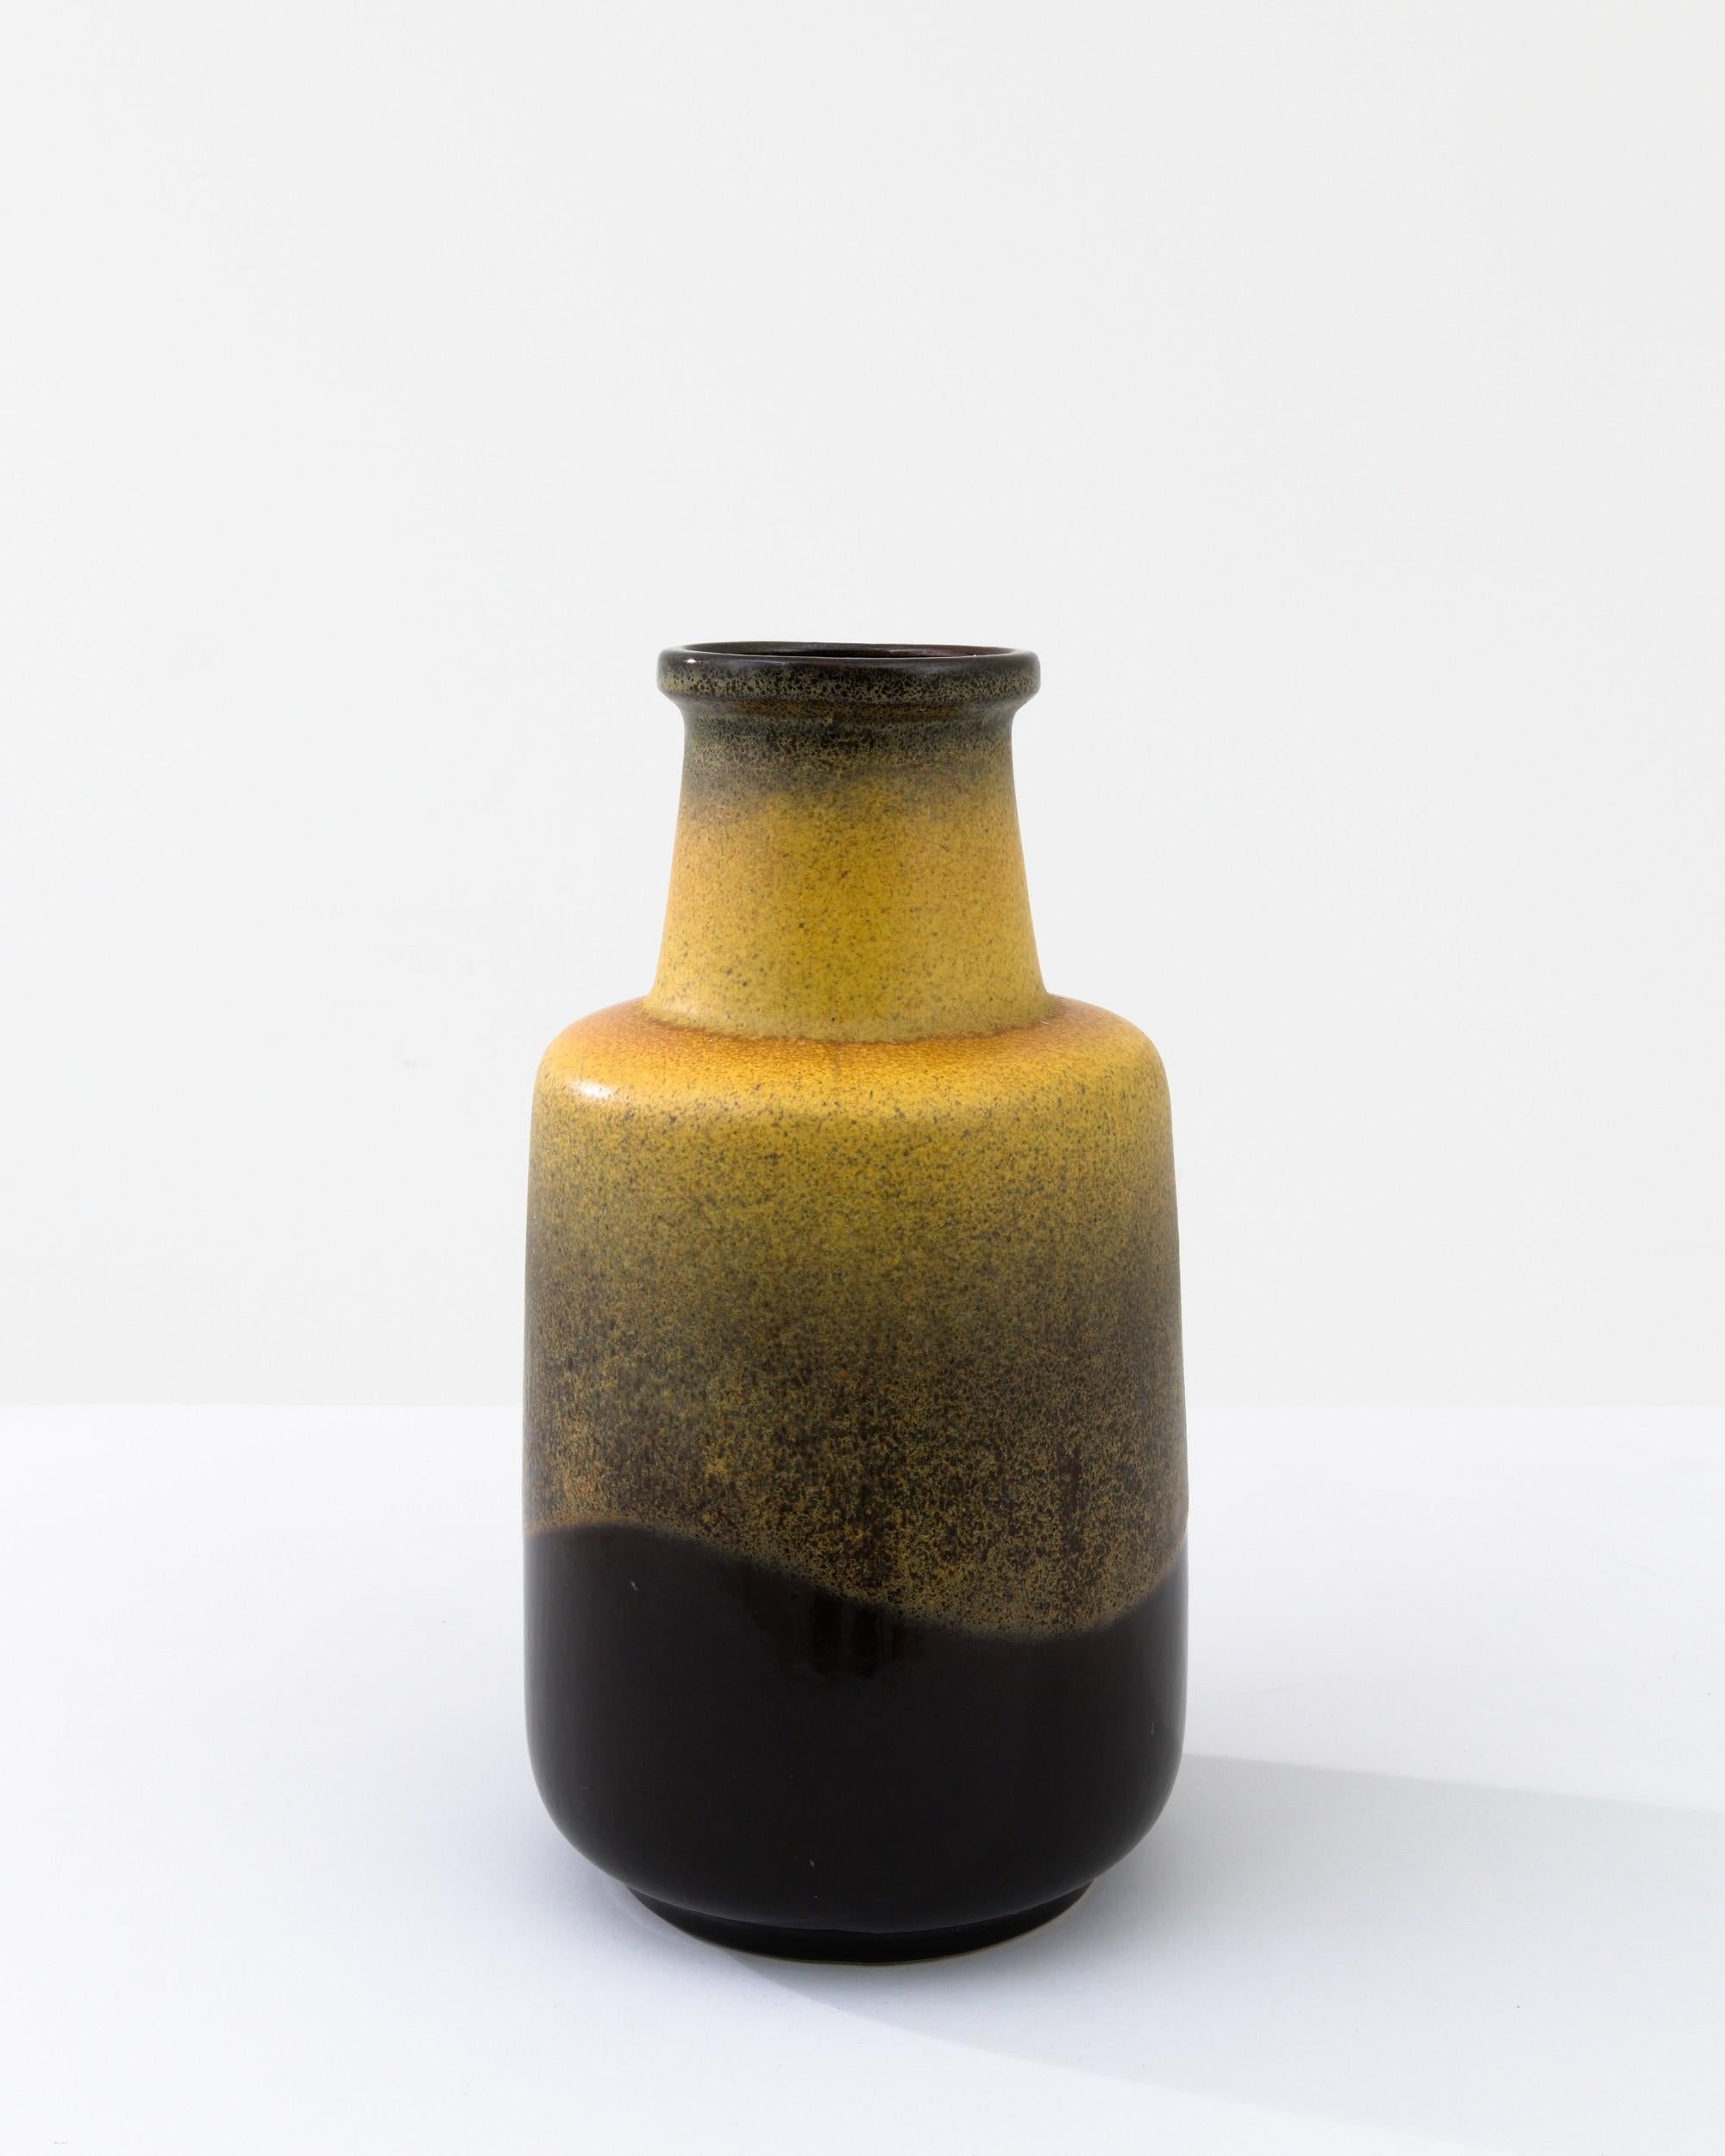 Combining time-honored craftsmanship with a sophisticated glaze, this vintage ceramic vase possesses an innate elegance. Made in West Germany in the 1960s, the stout neck and circular handle create a silhouette reminiscent of a simple stoneware jug,